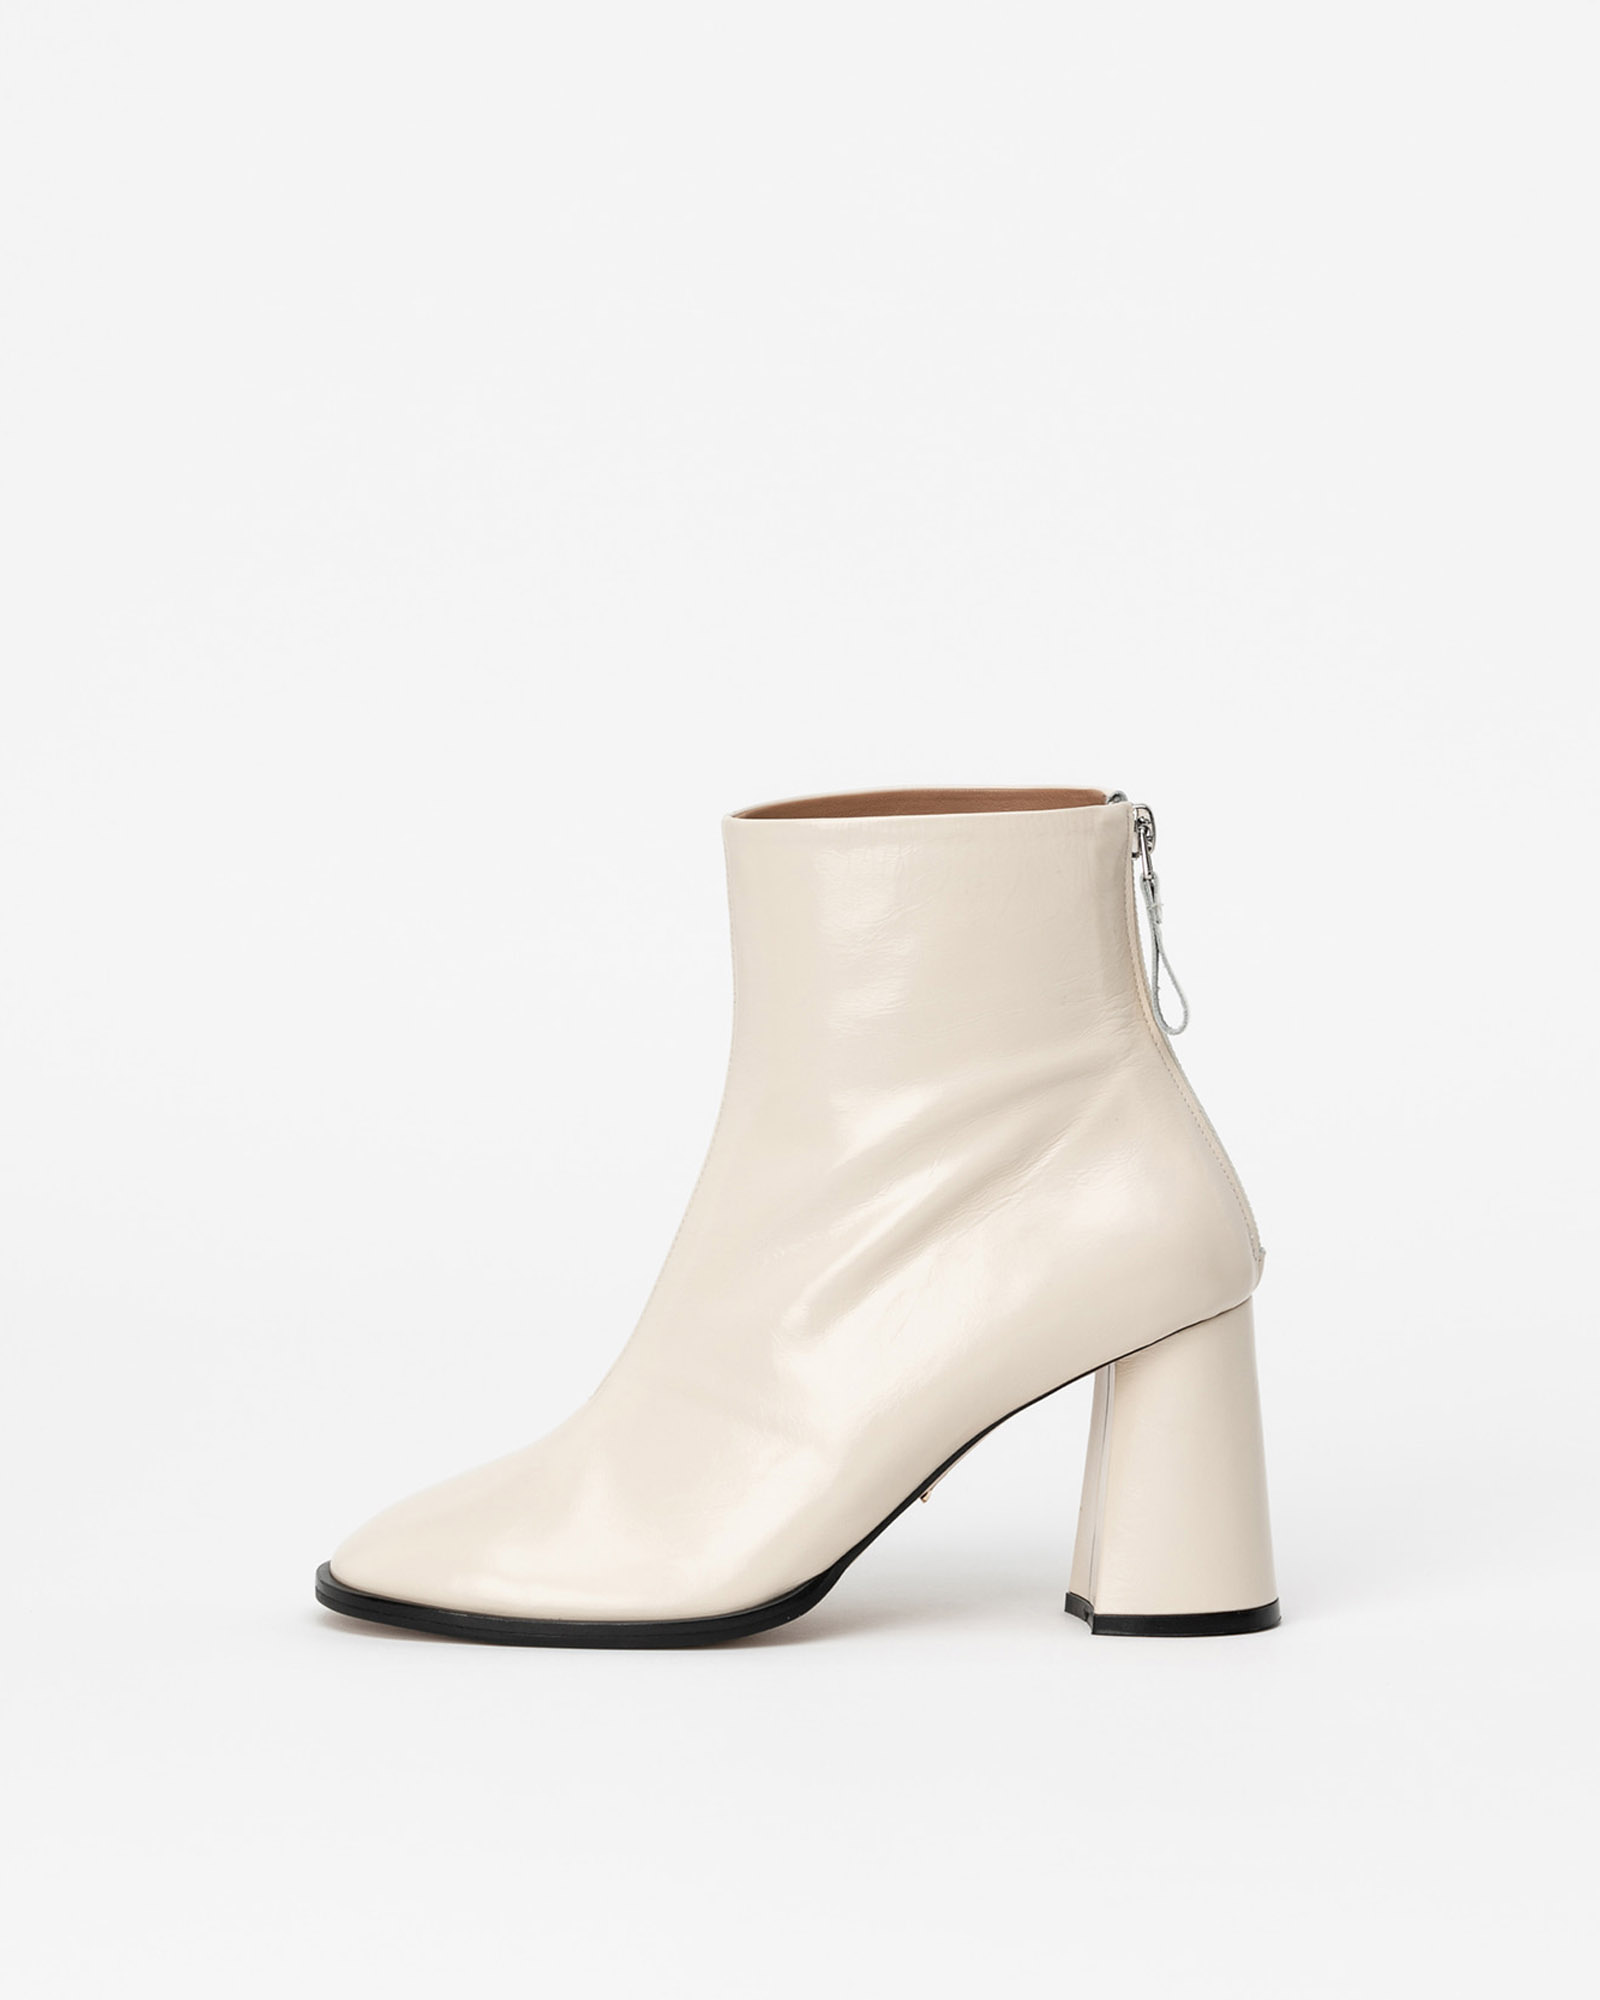 Briol Boots in Wrinkled Ivory